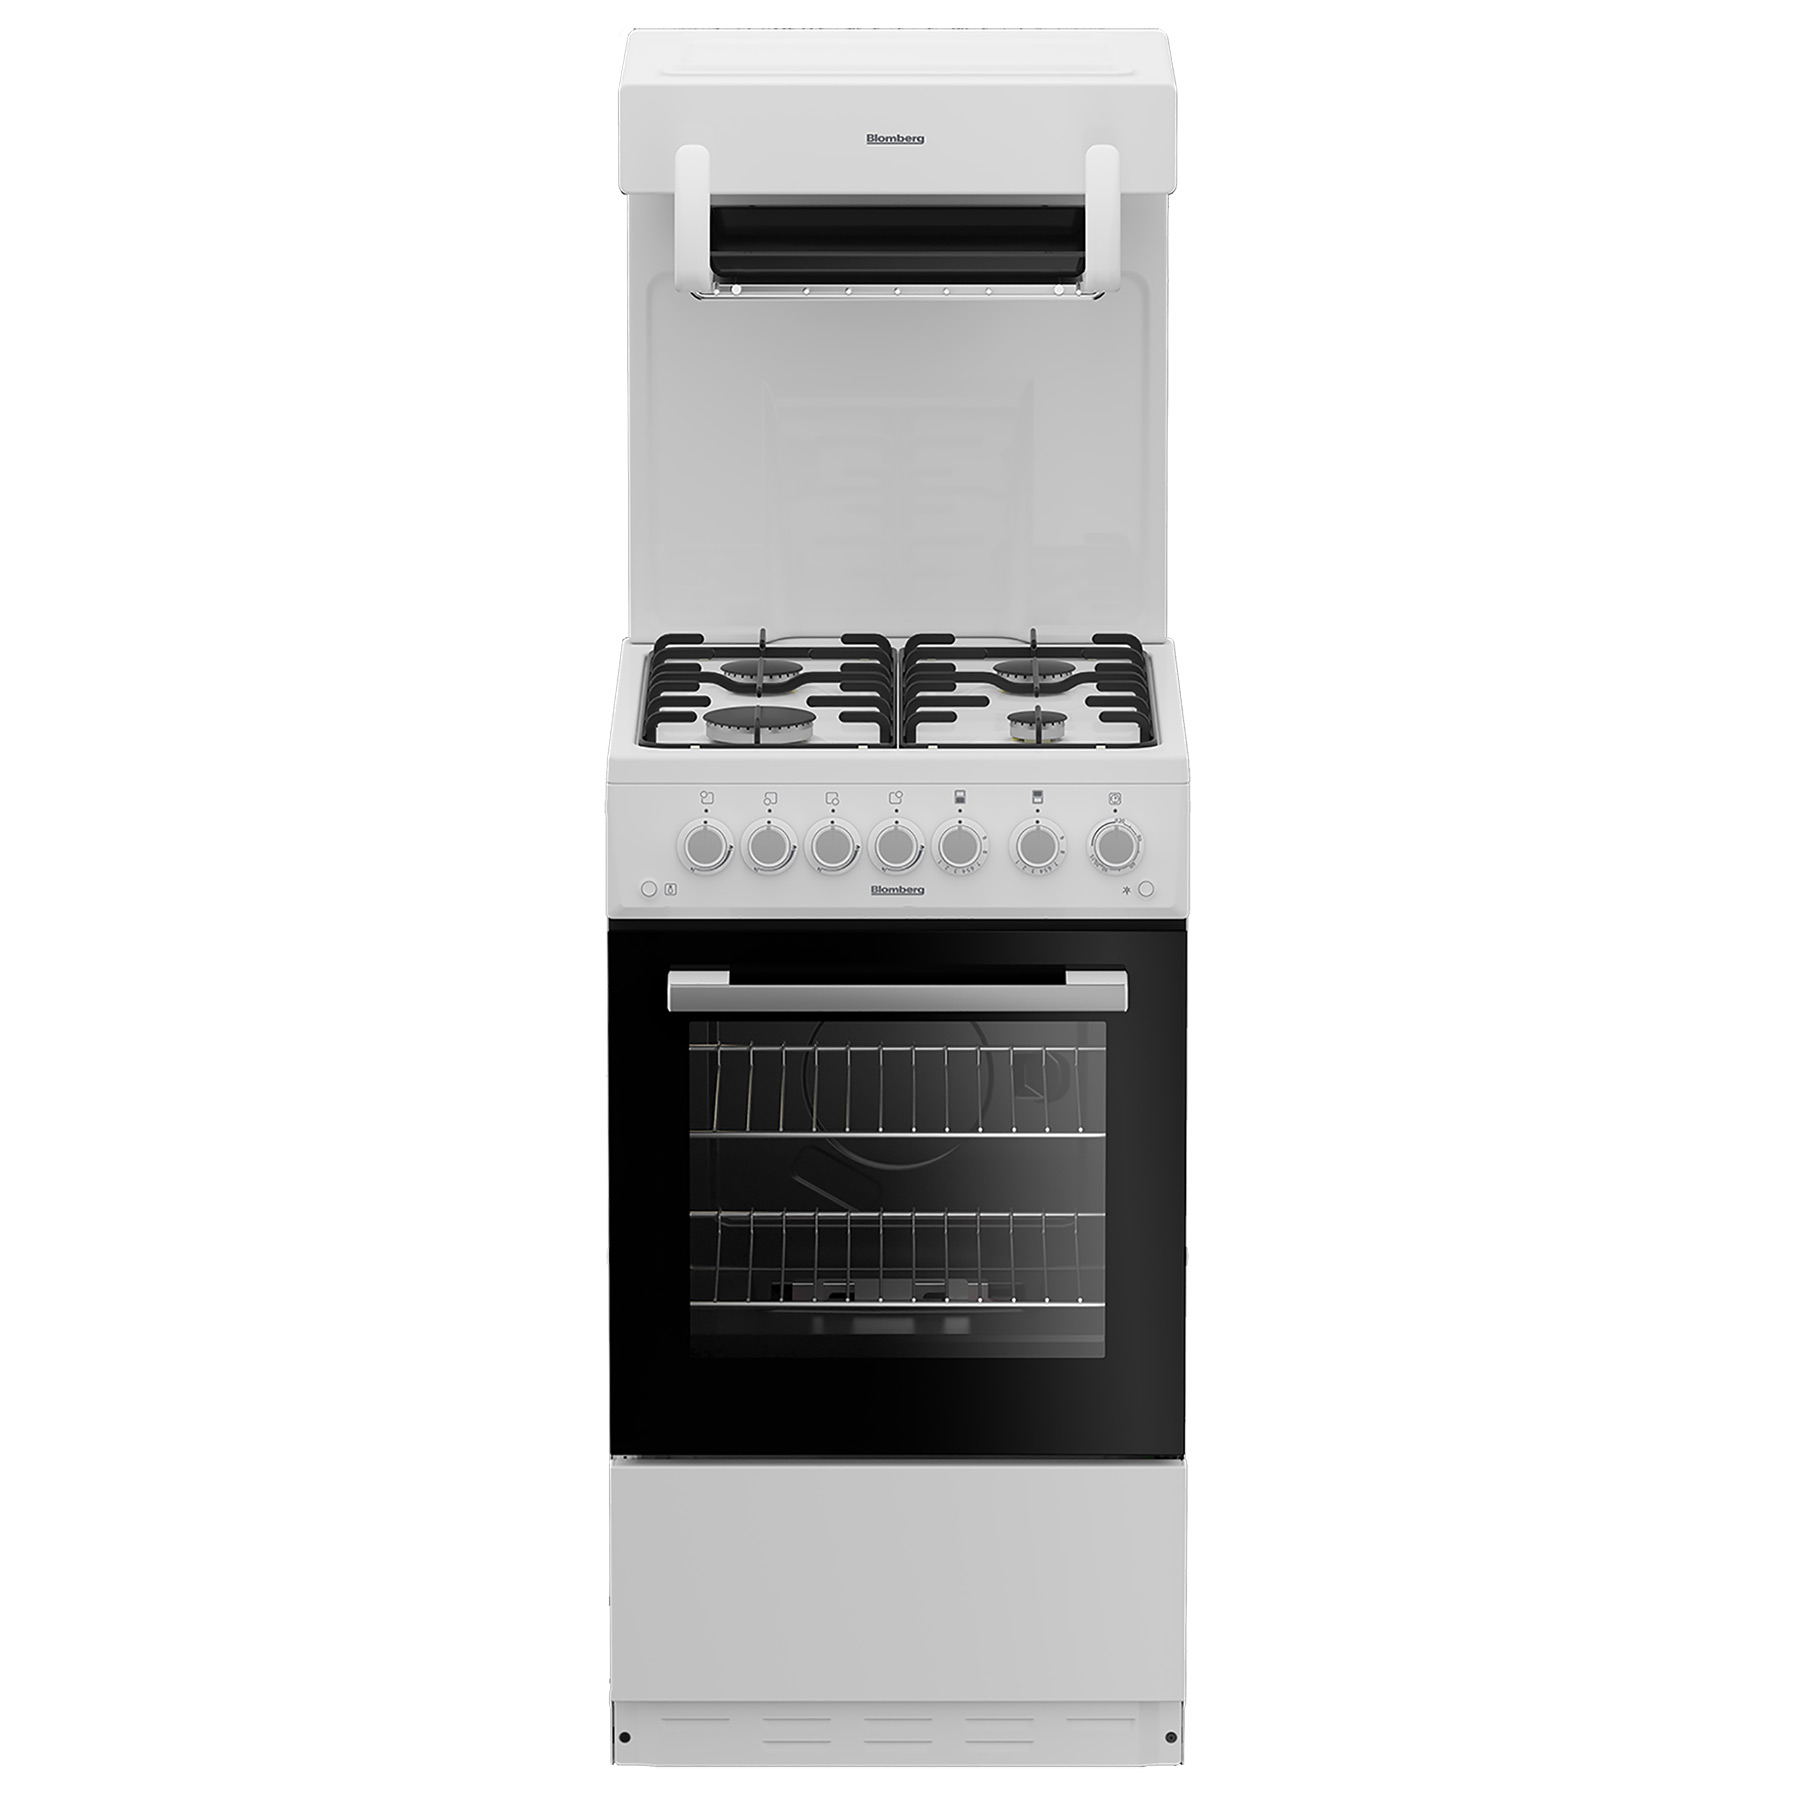 Image of Blomberg GGS9151W 50cm Single Oven Gas Cooker in White Eye Level Grill